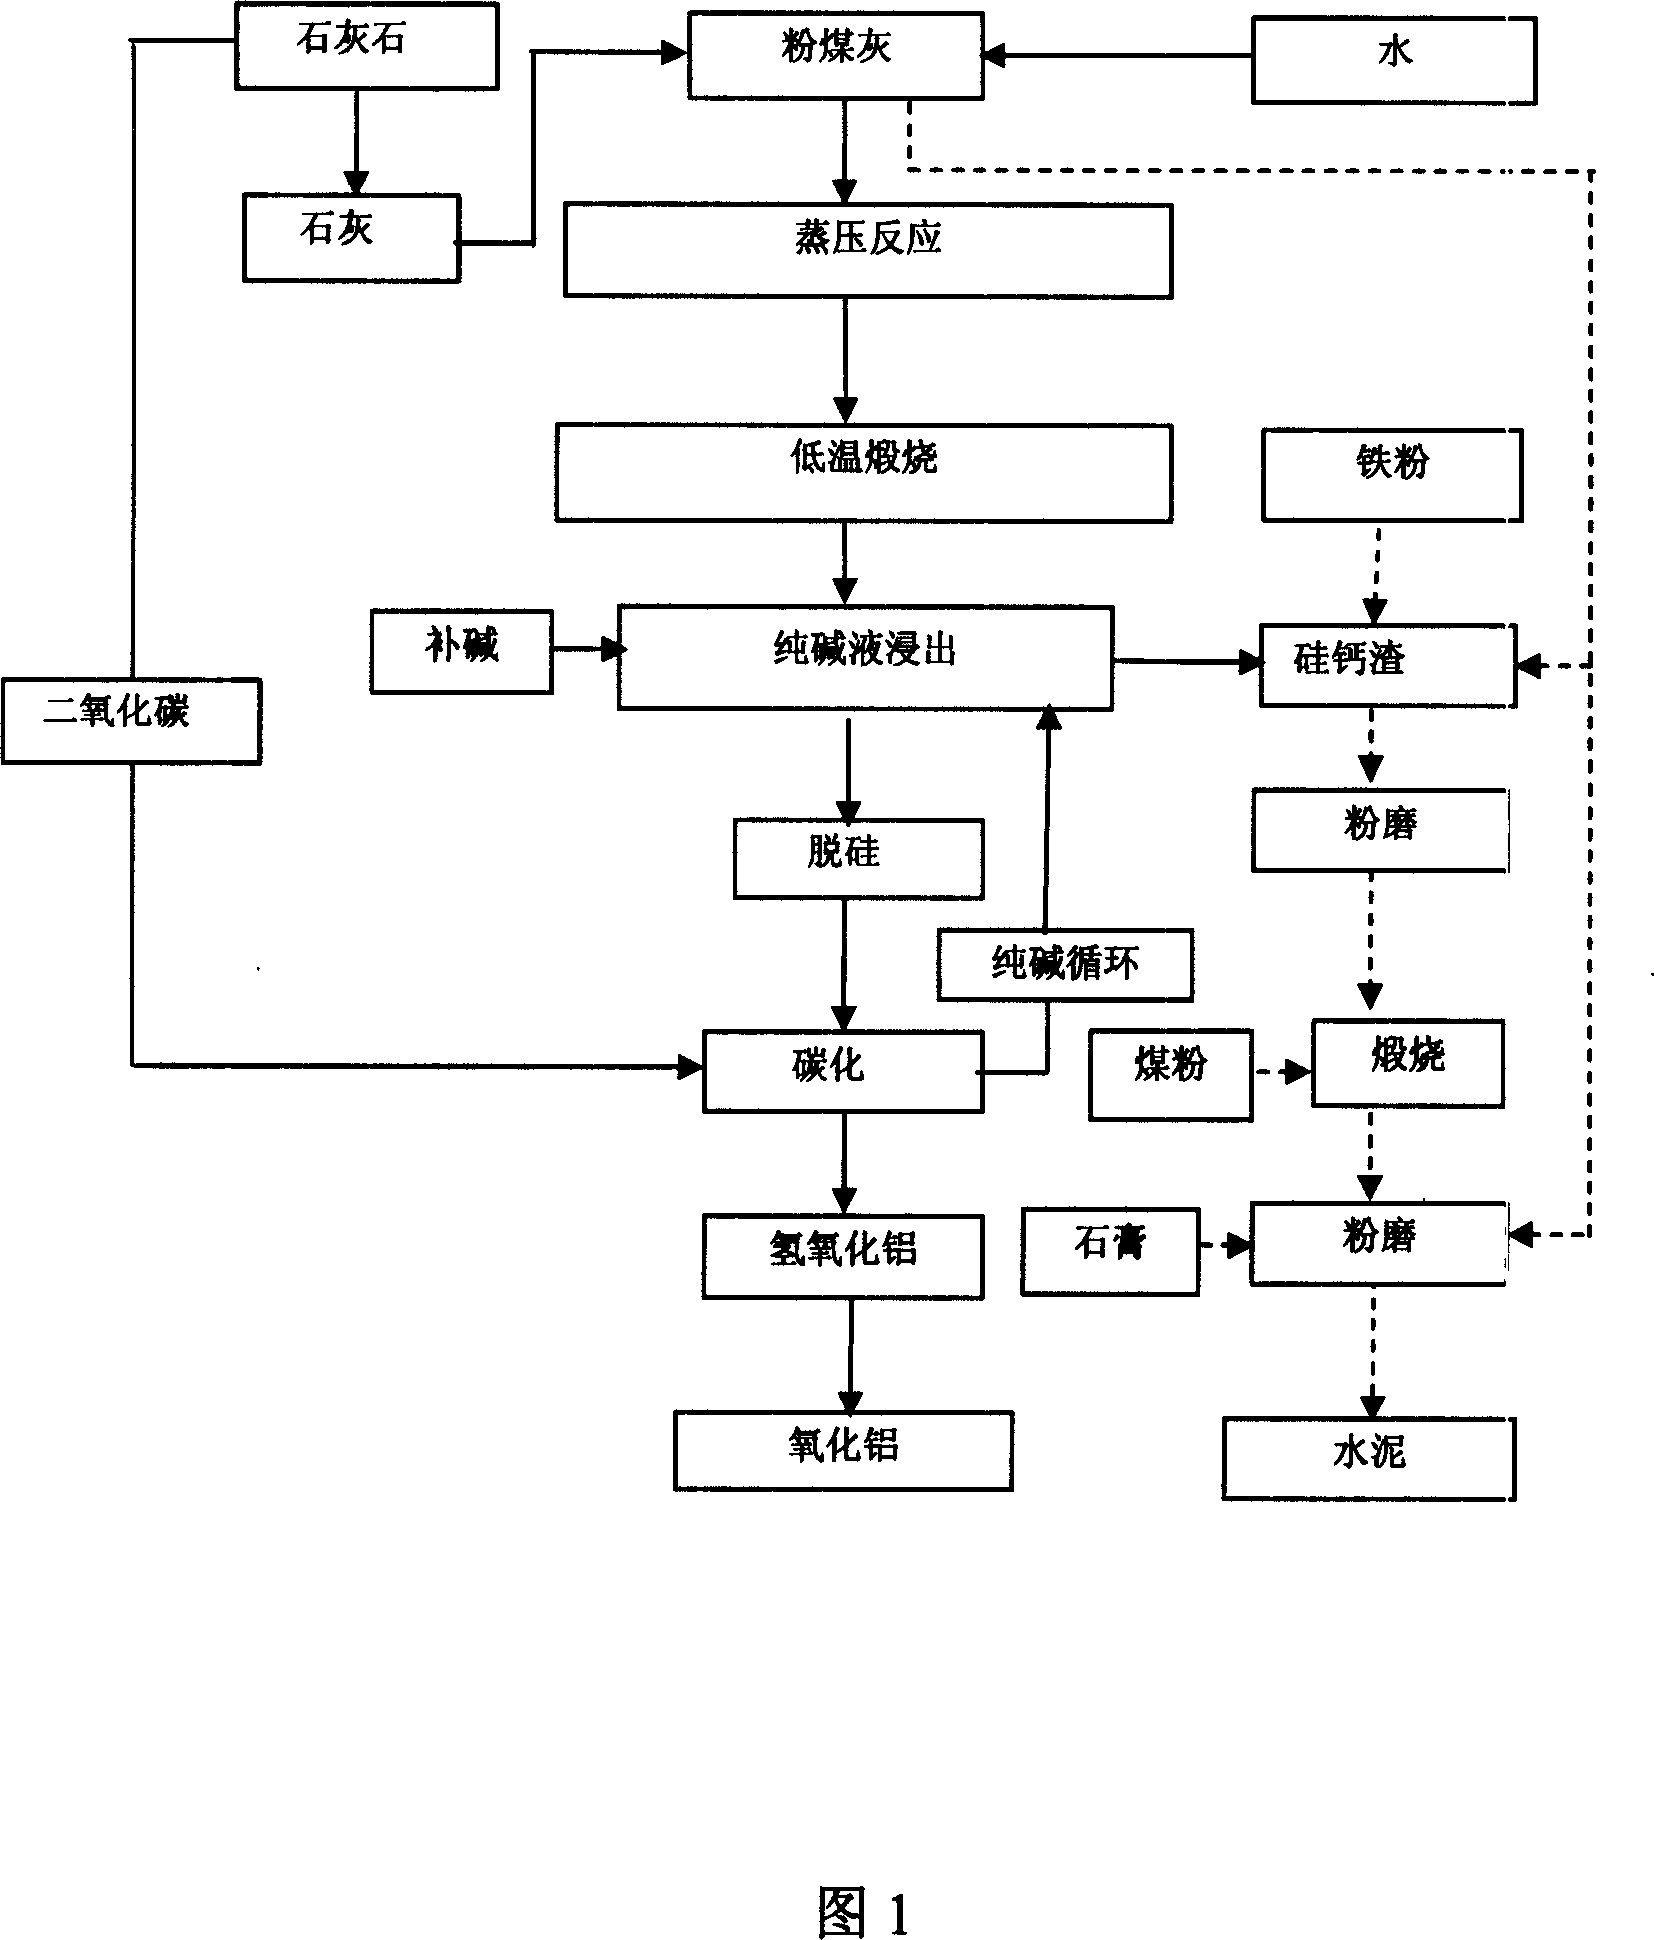 Method for extracting alumin from aluminous fly-ash and method for producing cement from fag end